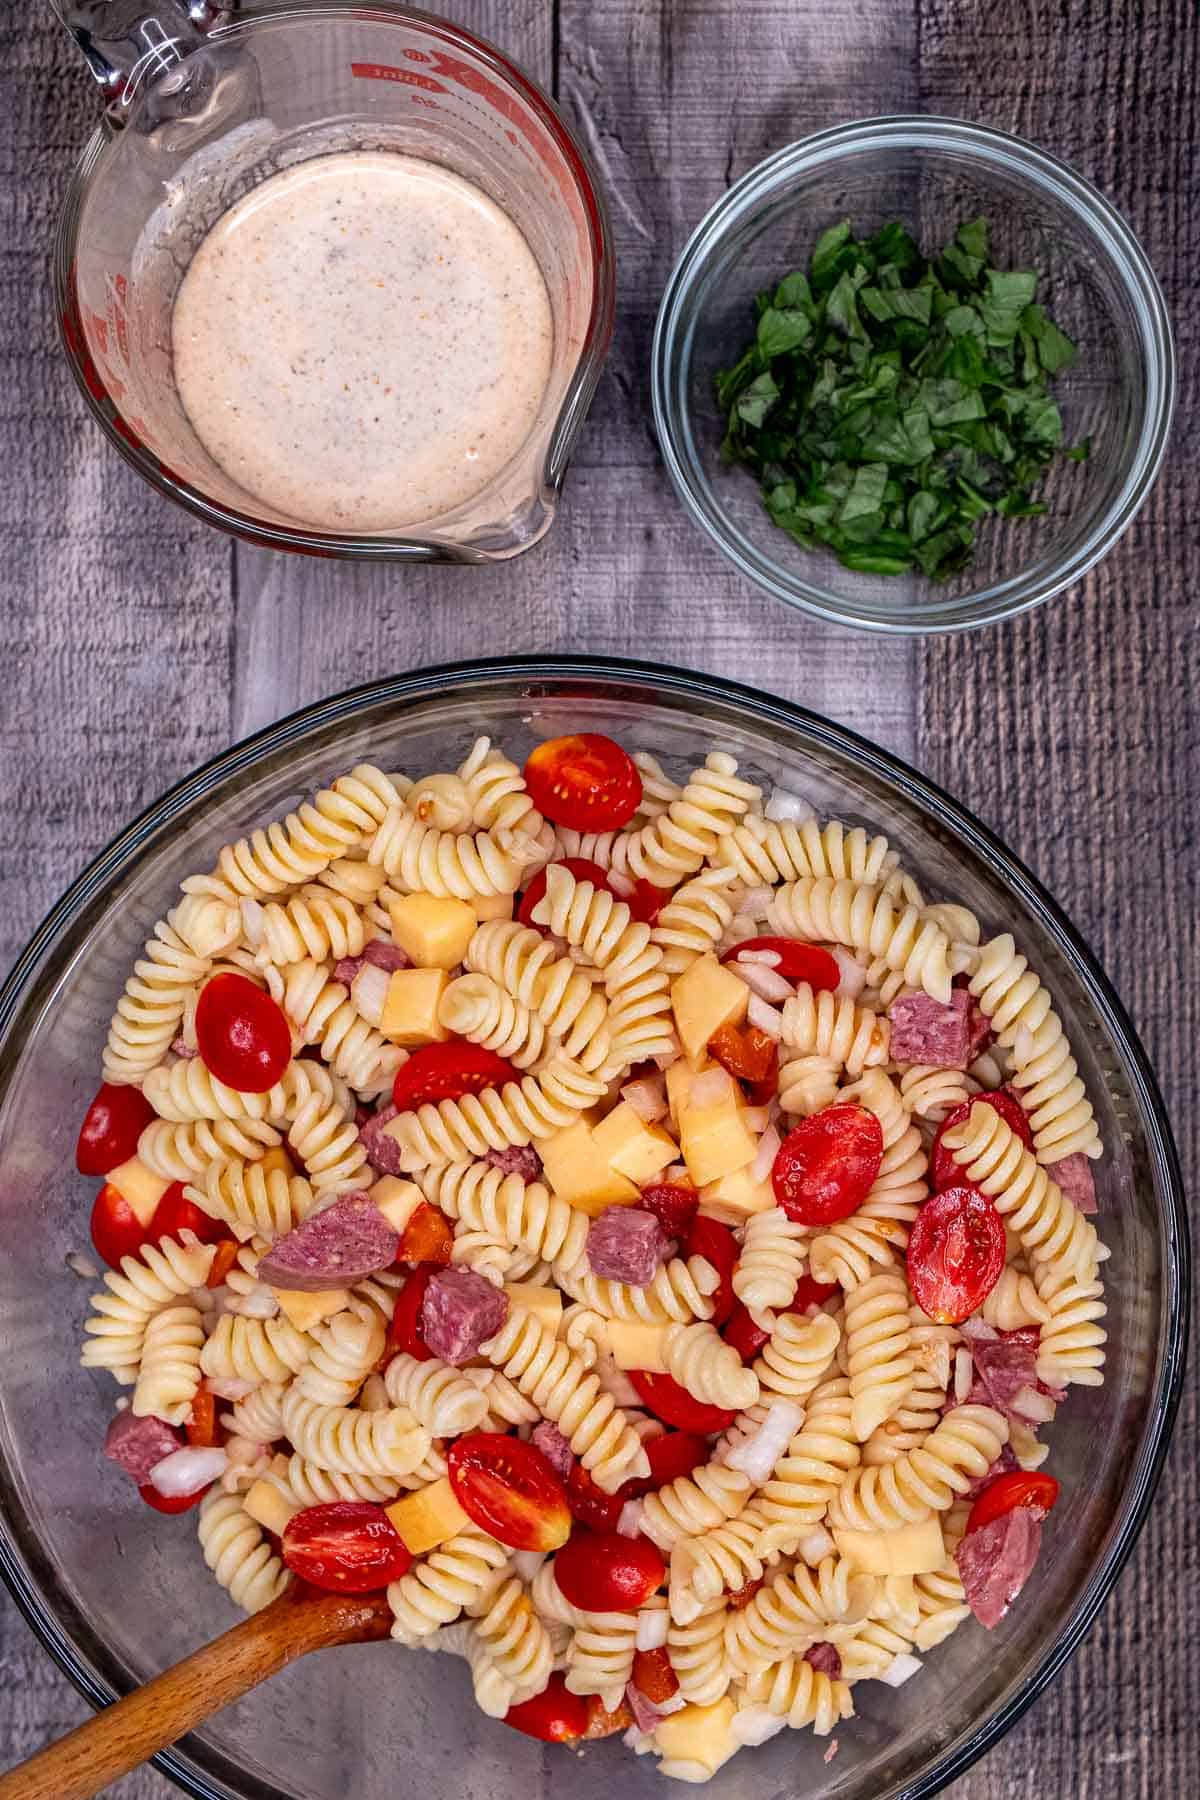 A large glass mixing bowl with pasta salad mixed together and above that a glass with the dressing and a bowl with fresh basil.